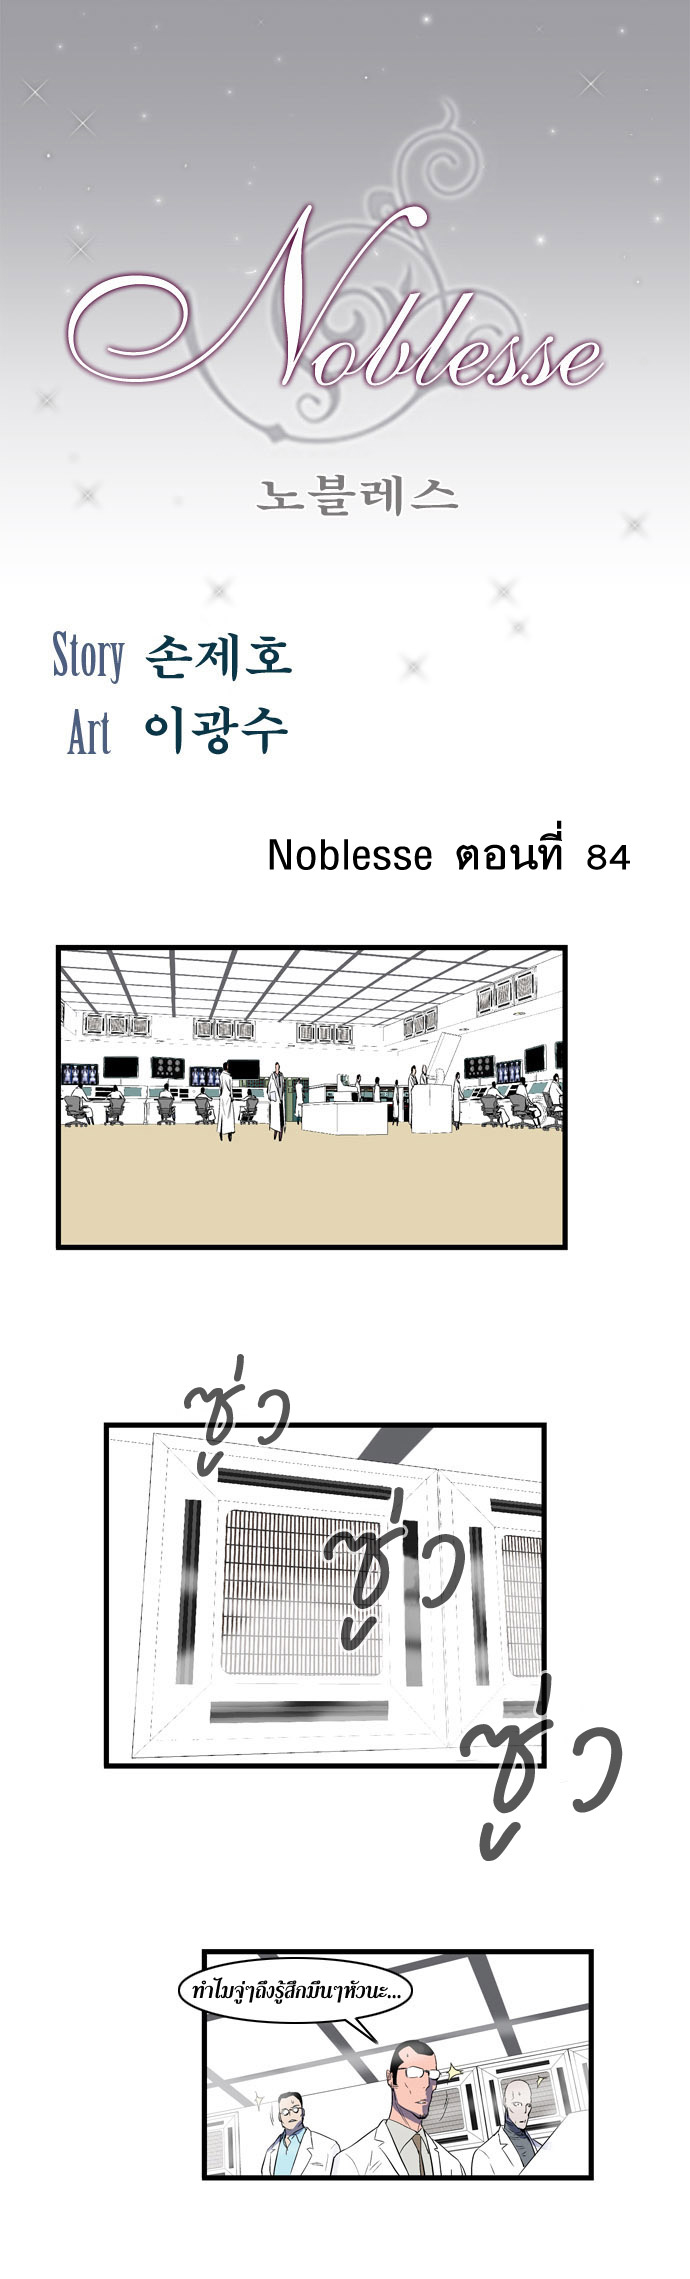 Noblesse 84 002